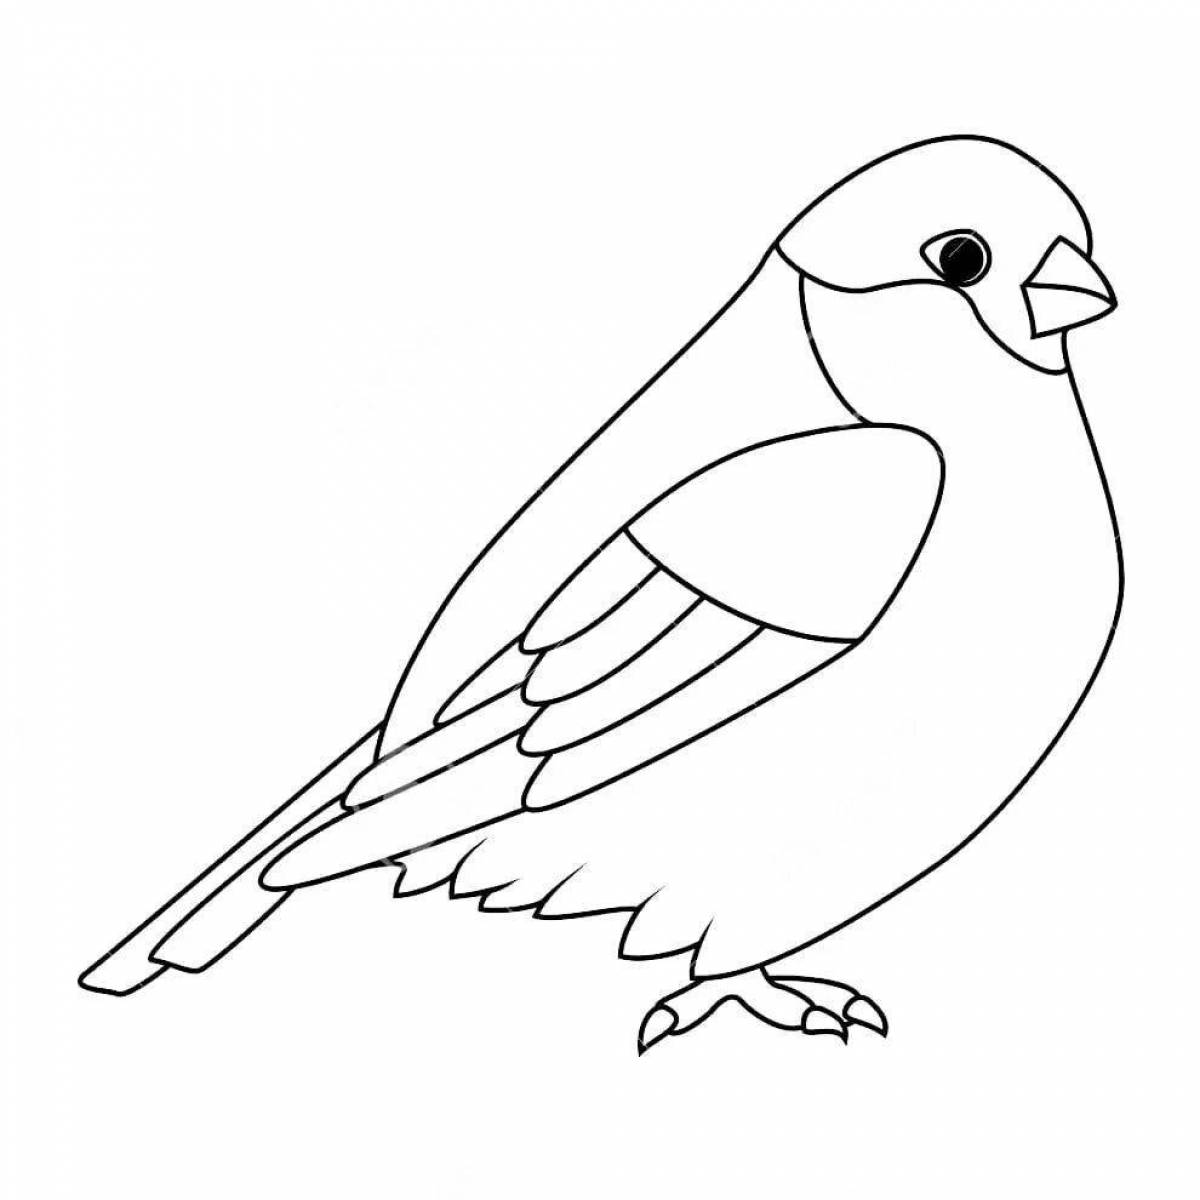 Coloring book wintering tits